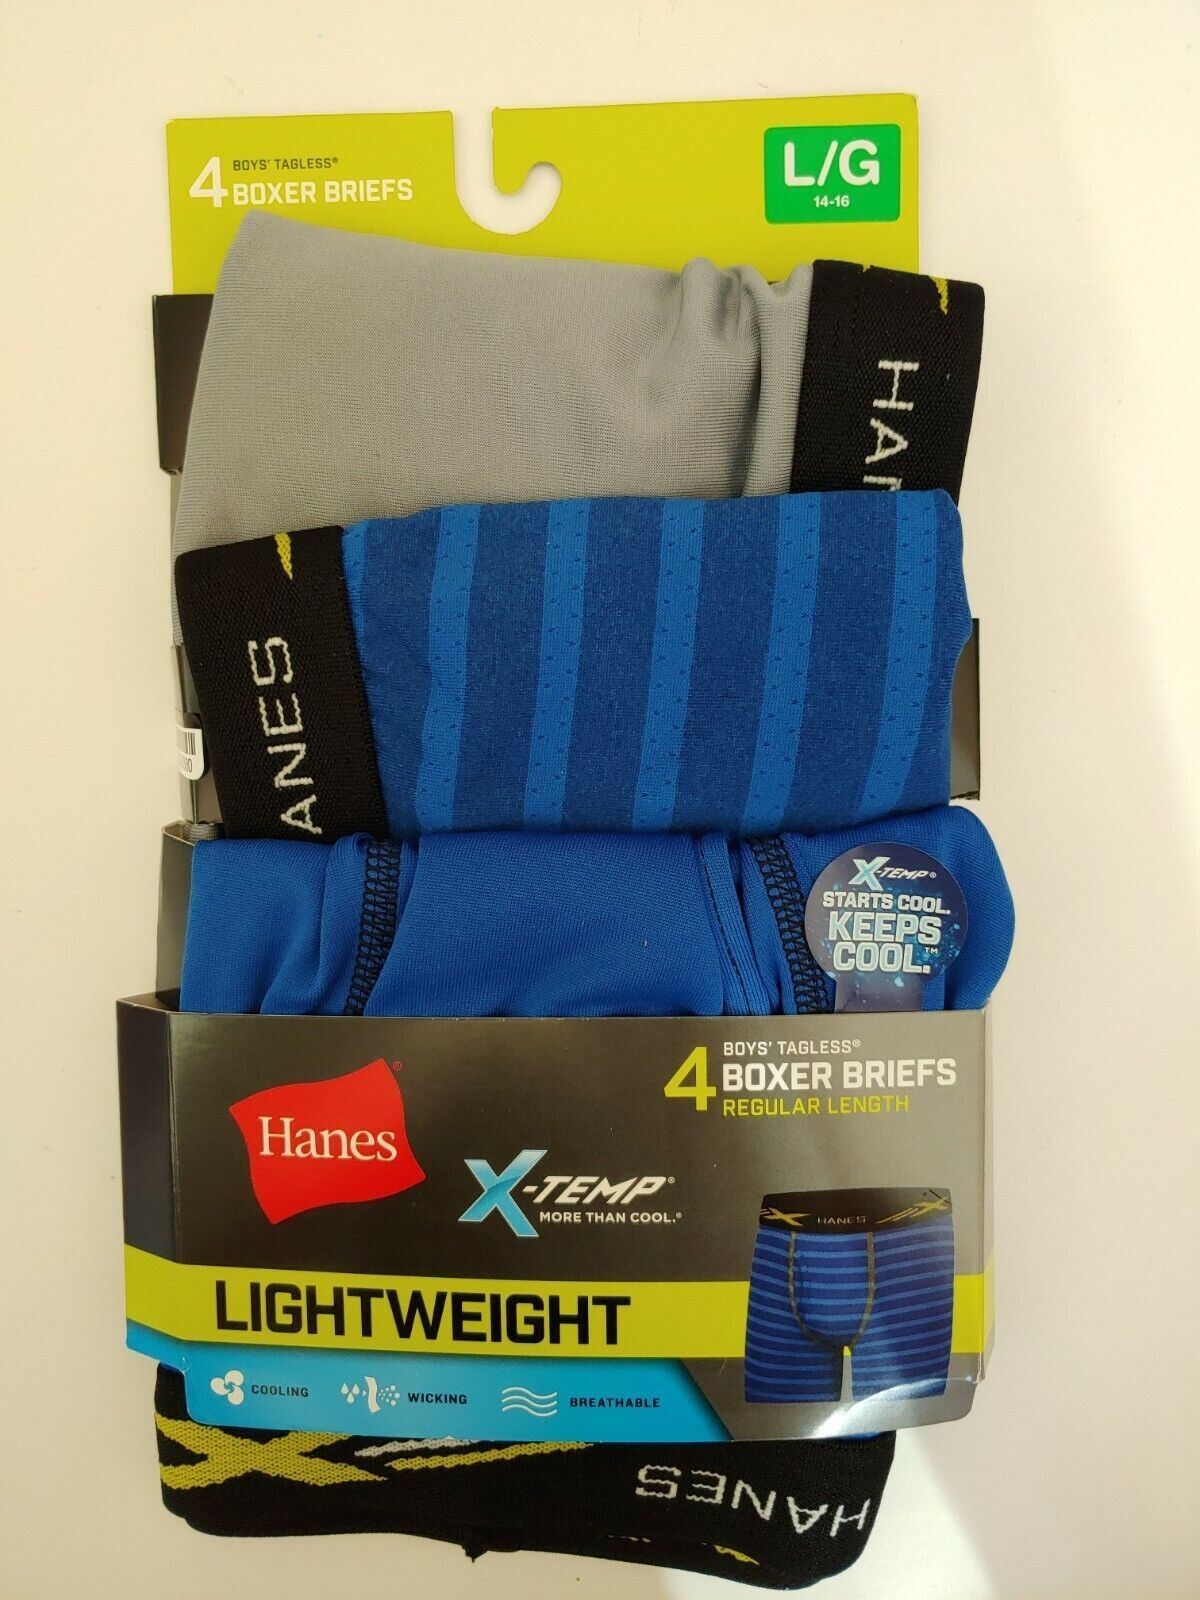 Hanes X Temp 3 Pack Lightweight Boxer Briefs and similar items